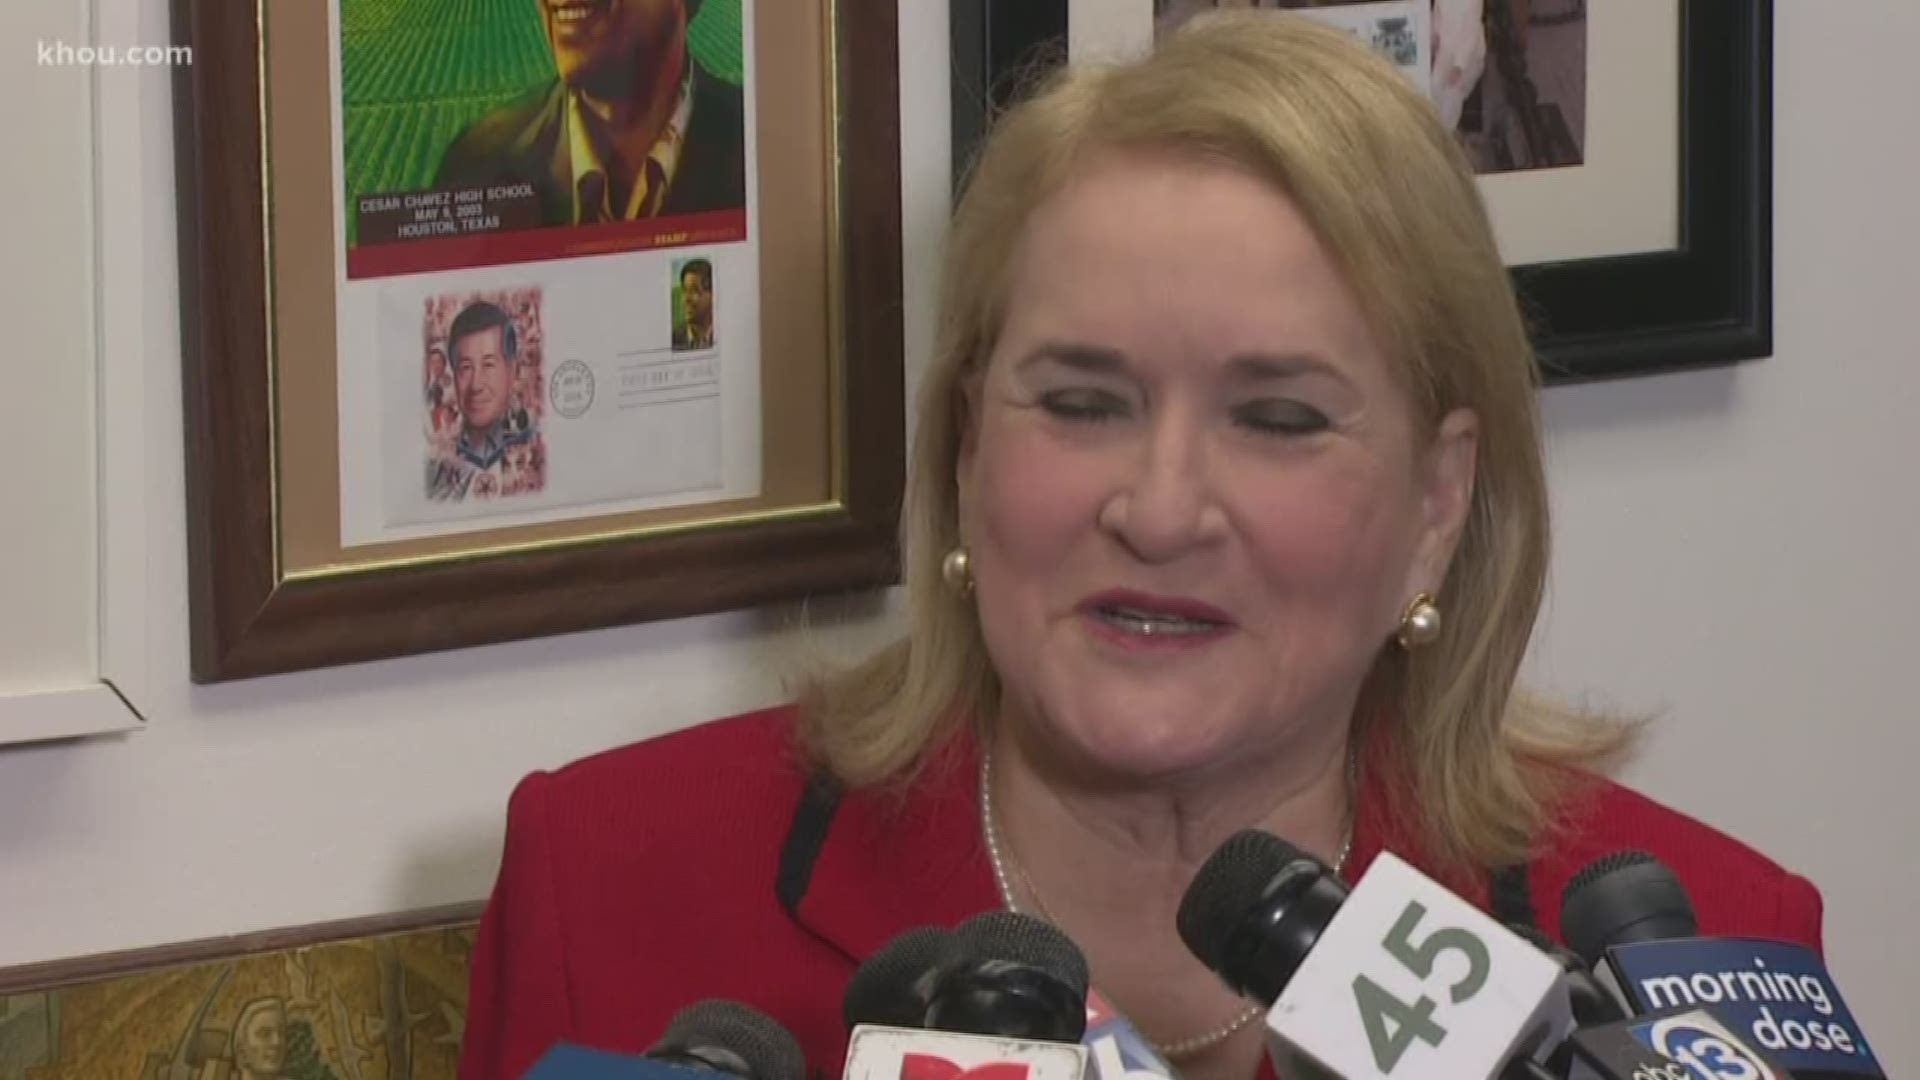 Congresswoman Sylvia Garcia called the invitation to serve a "big honor" with a lot of responsibility to the law and democracy.